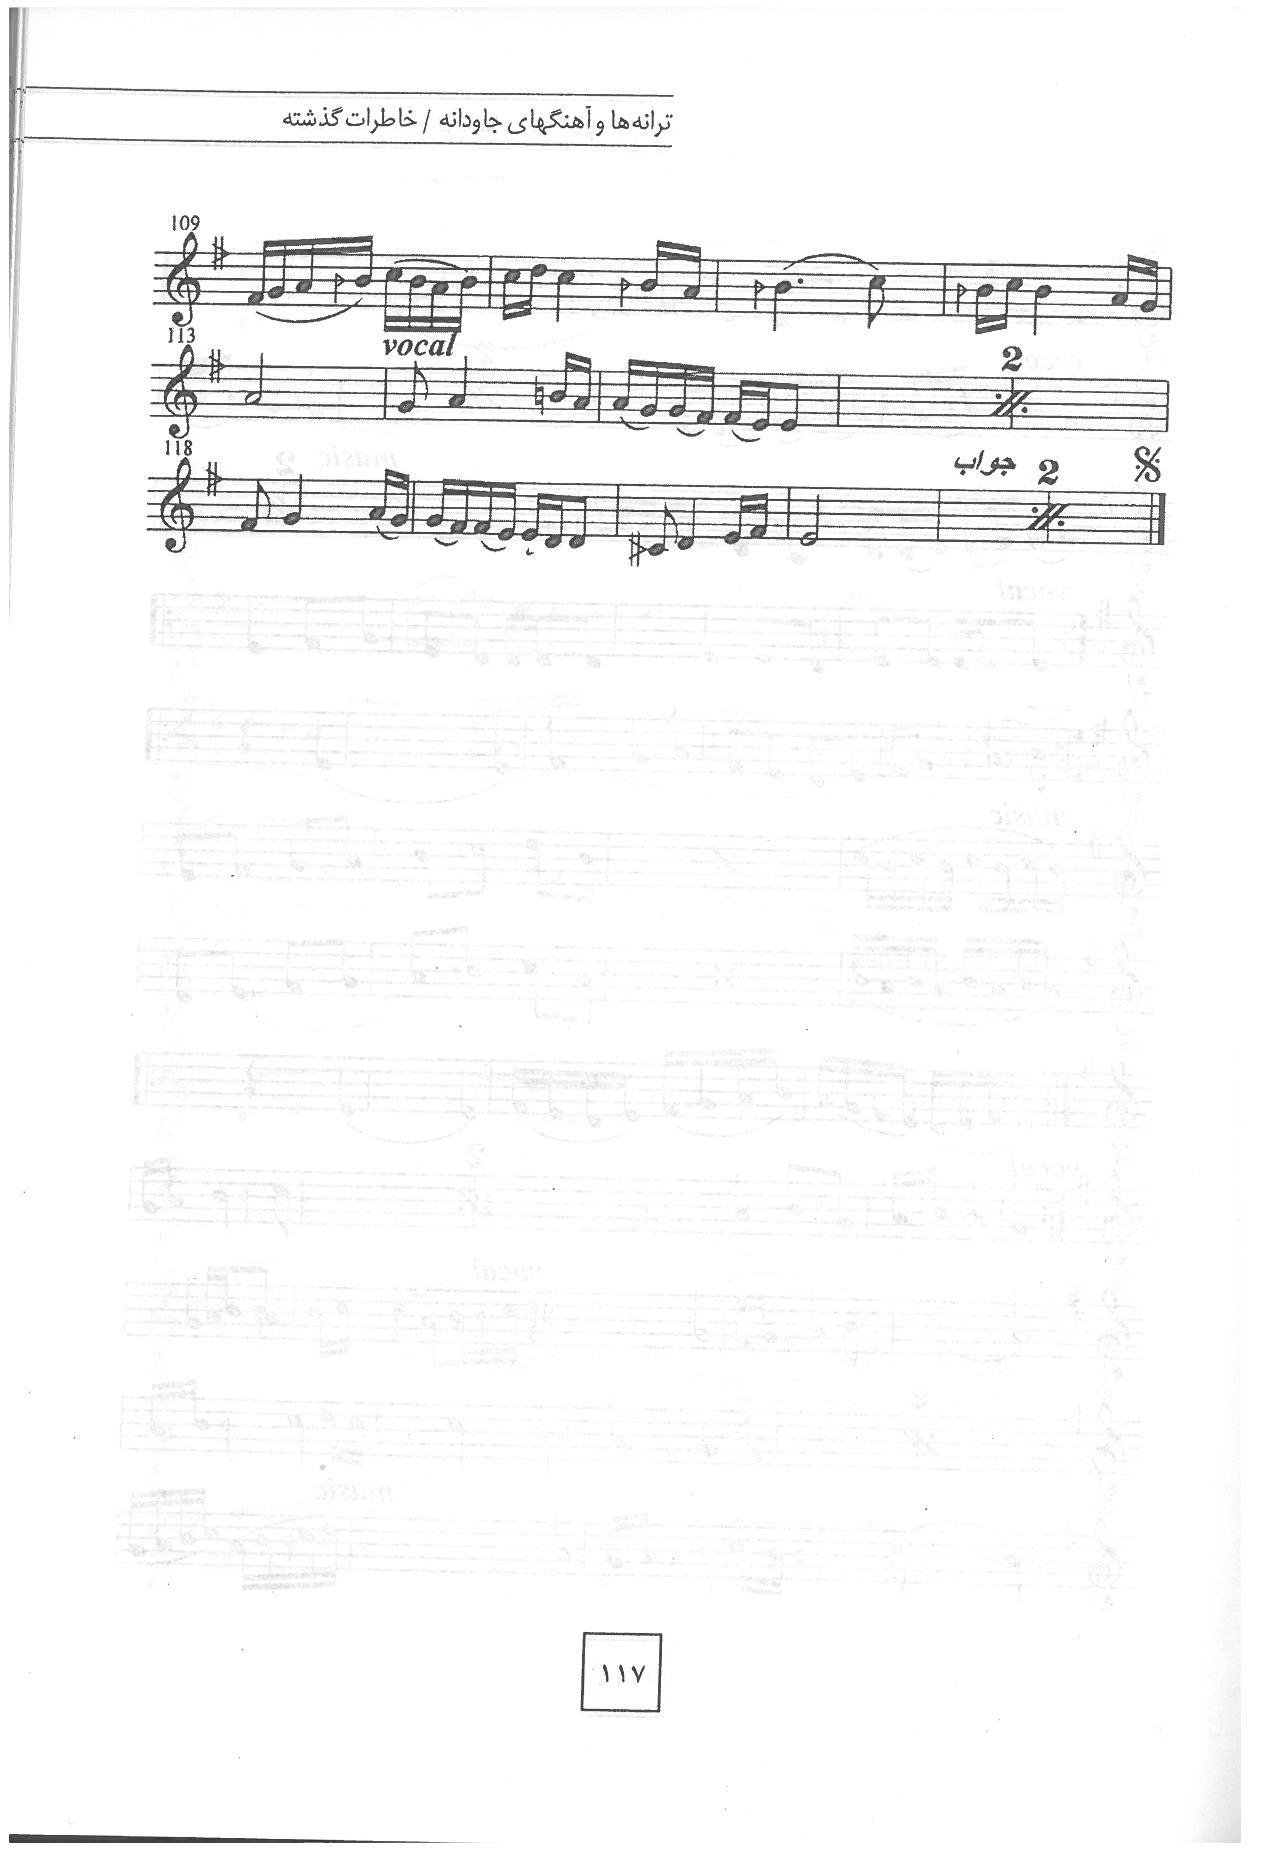 A sheet music page with notes and a few lines.